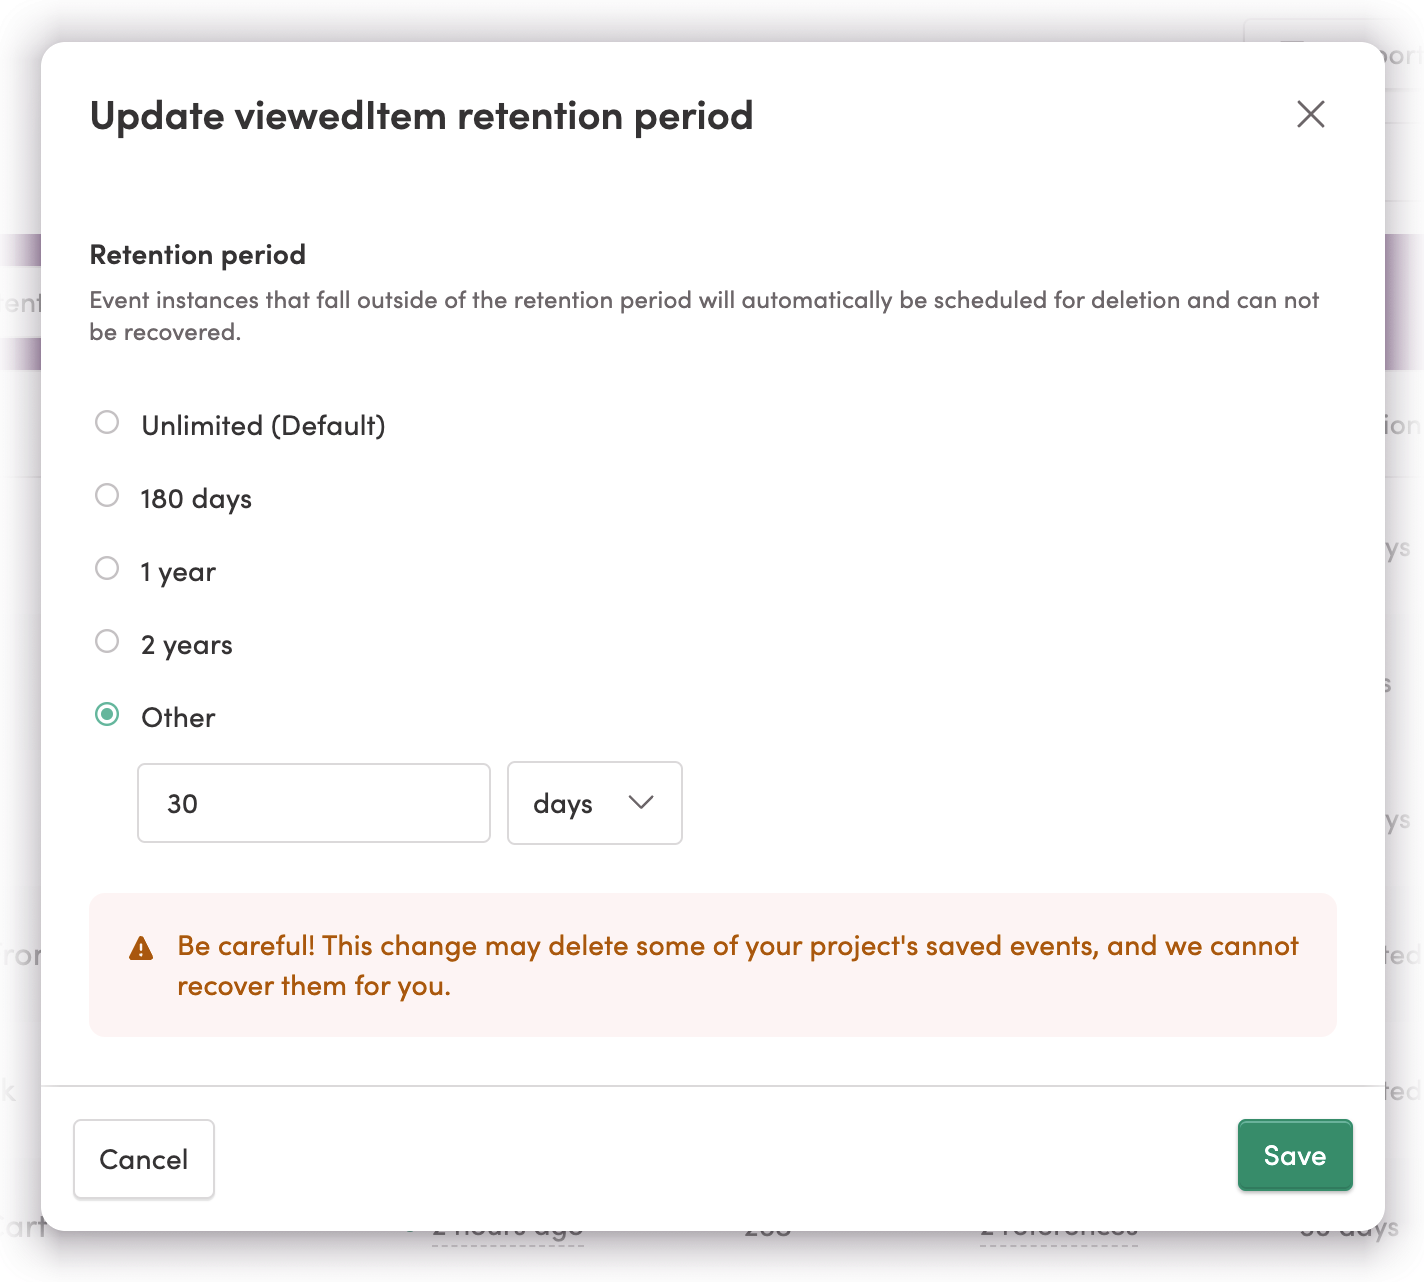 Updating a retention period